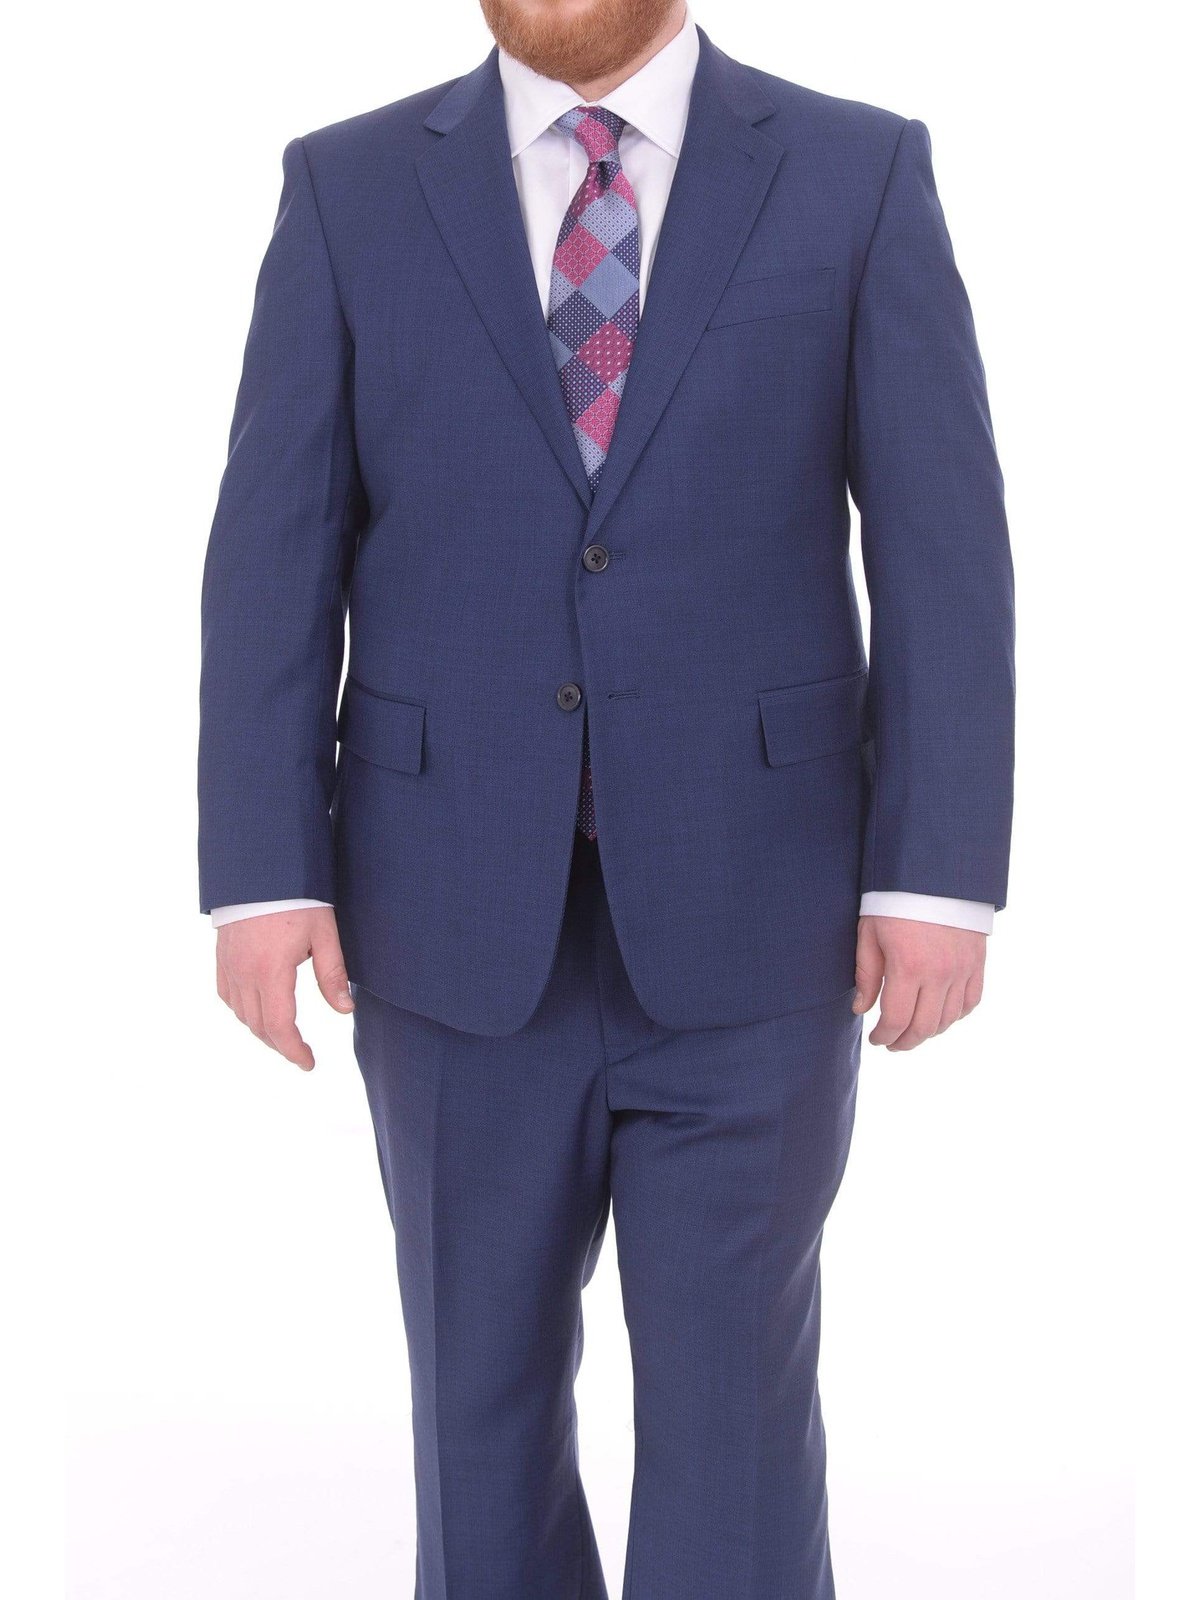 Lazetti Couture Sale Suits 36S Lazetti Couture Portly Fit Blue Textured Two Button Wool Suit